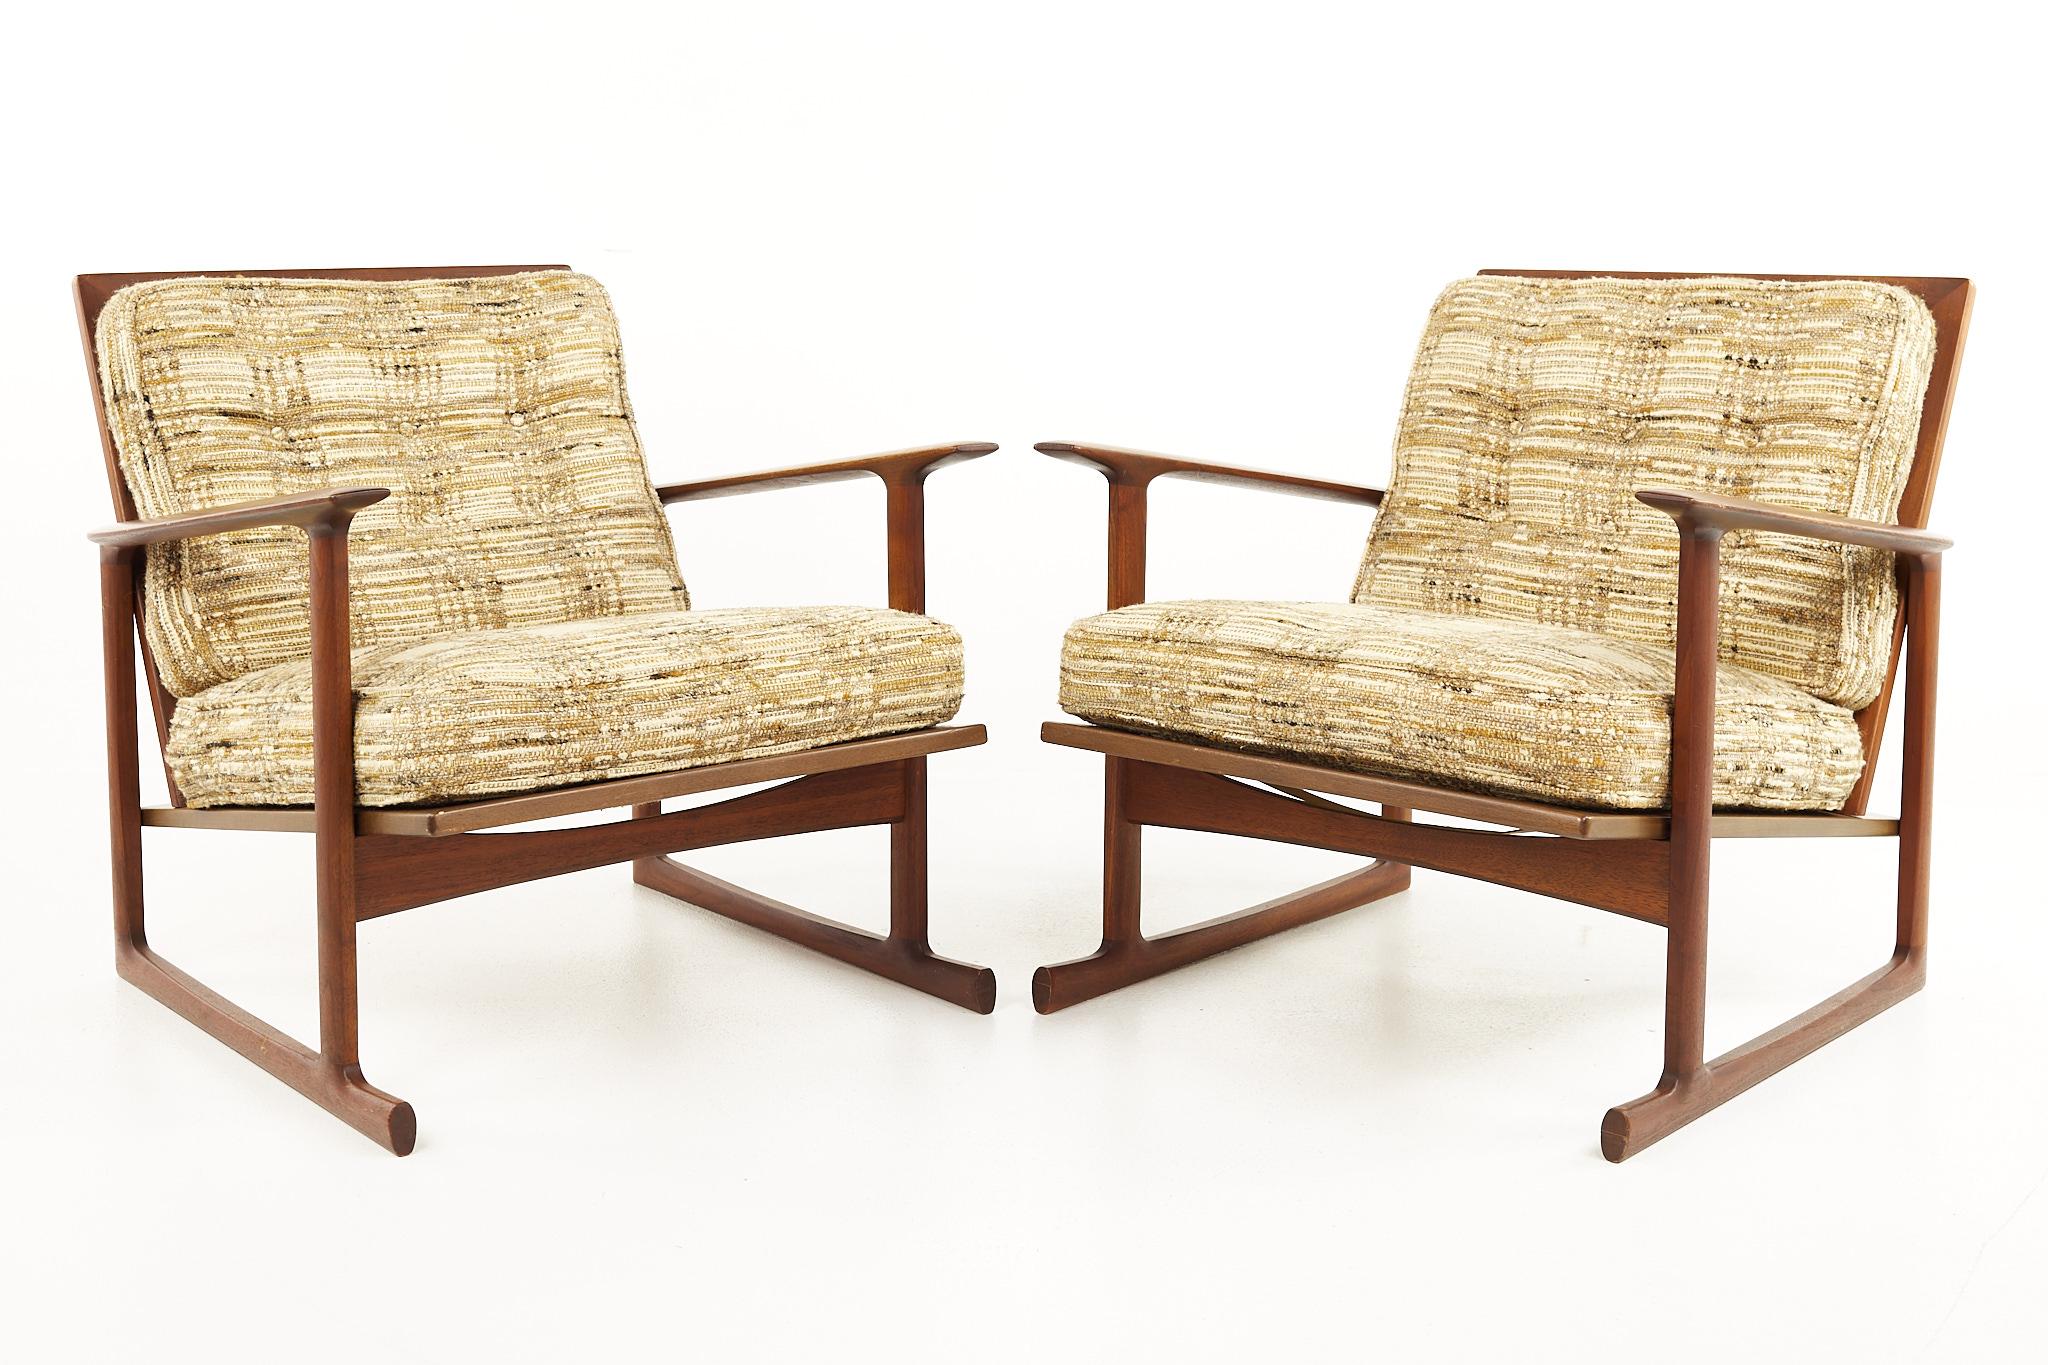 Kofod Larsen for Selig Mid Century Teak Sleigh Leg Lounge Chairs - A Pair

Each chair measures: 29 wide x 31 deep x 28 high, with a seat height of 16 inches and arm height of 22 inches

All pieces of furniture can be had in what we call restored